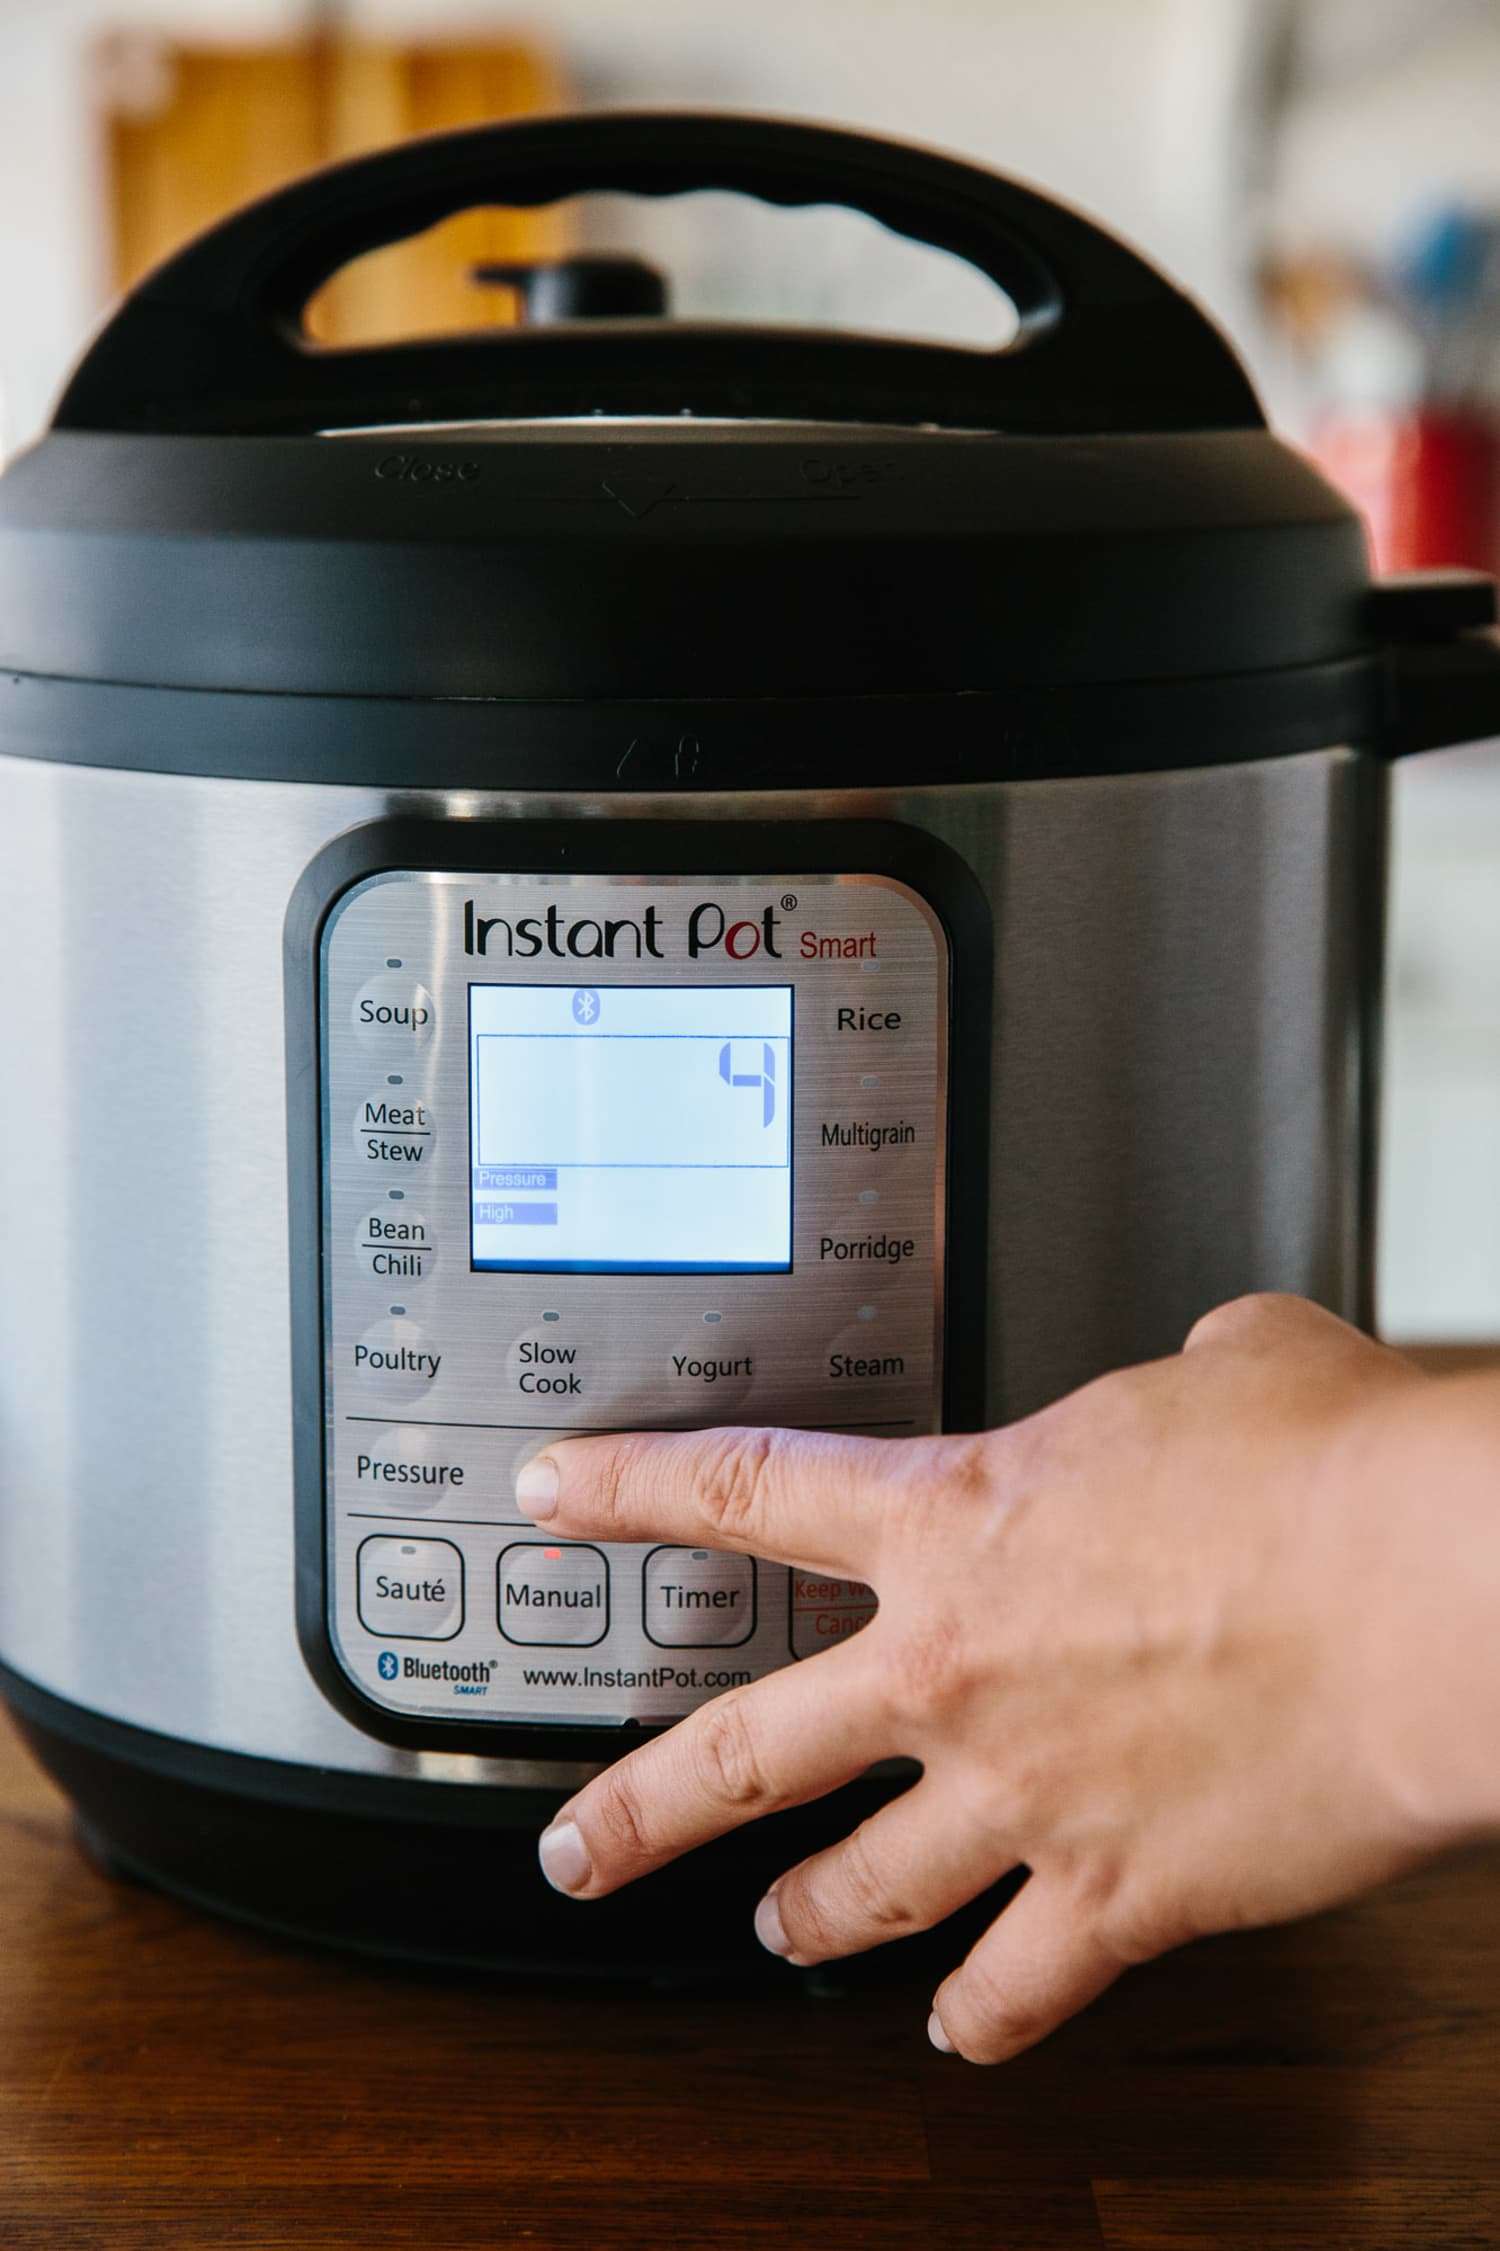 The Best Thing to Make in the Instant Pot